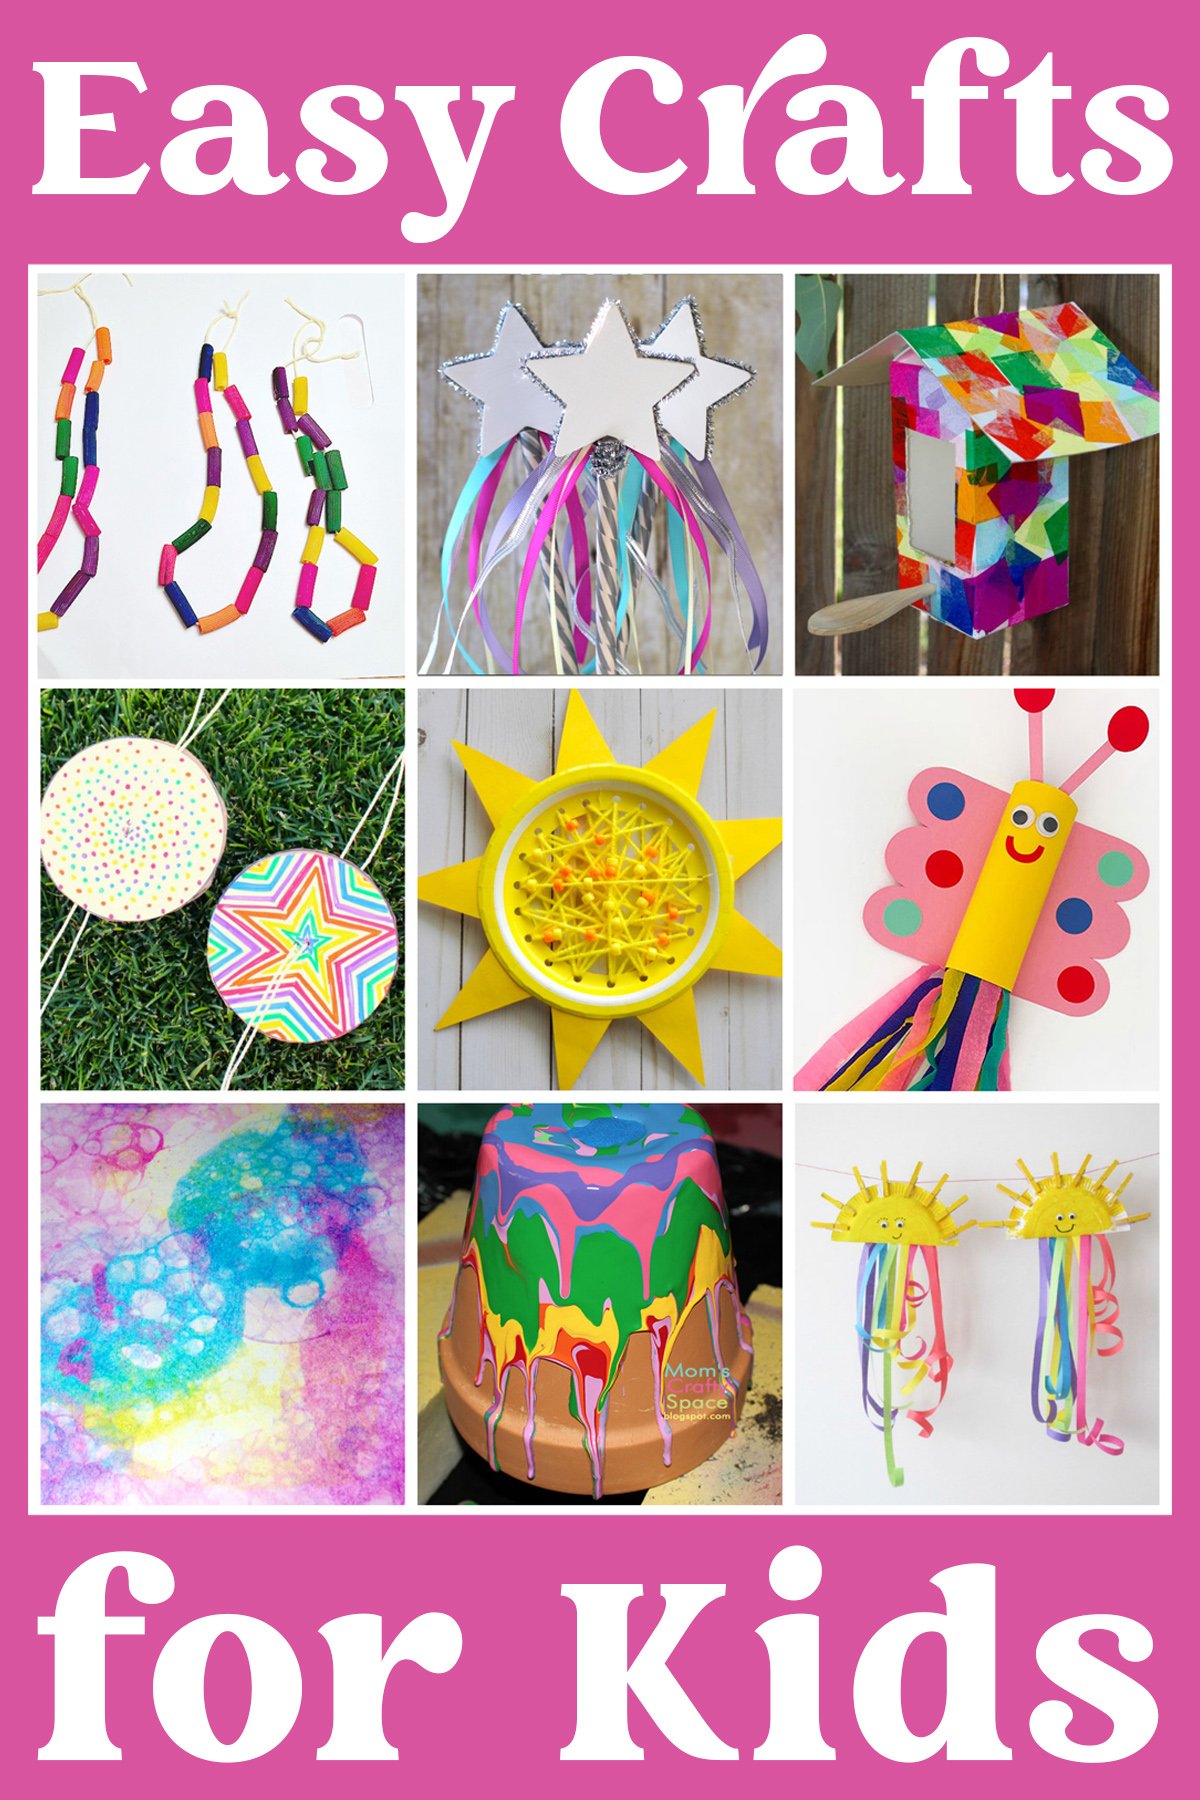 "50 Easy Crafts for Kids" Collage on pink background with white text and nine example kids craft project ideas